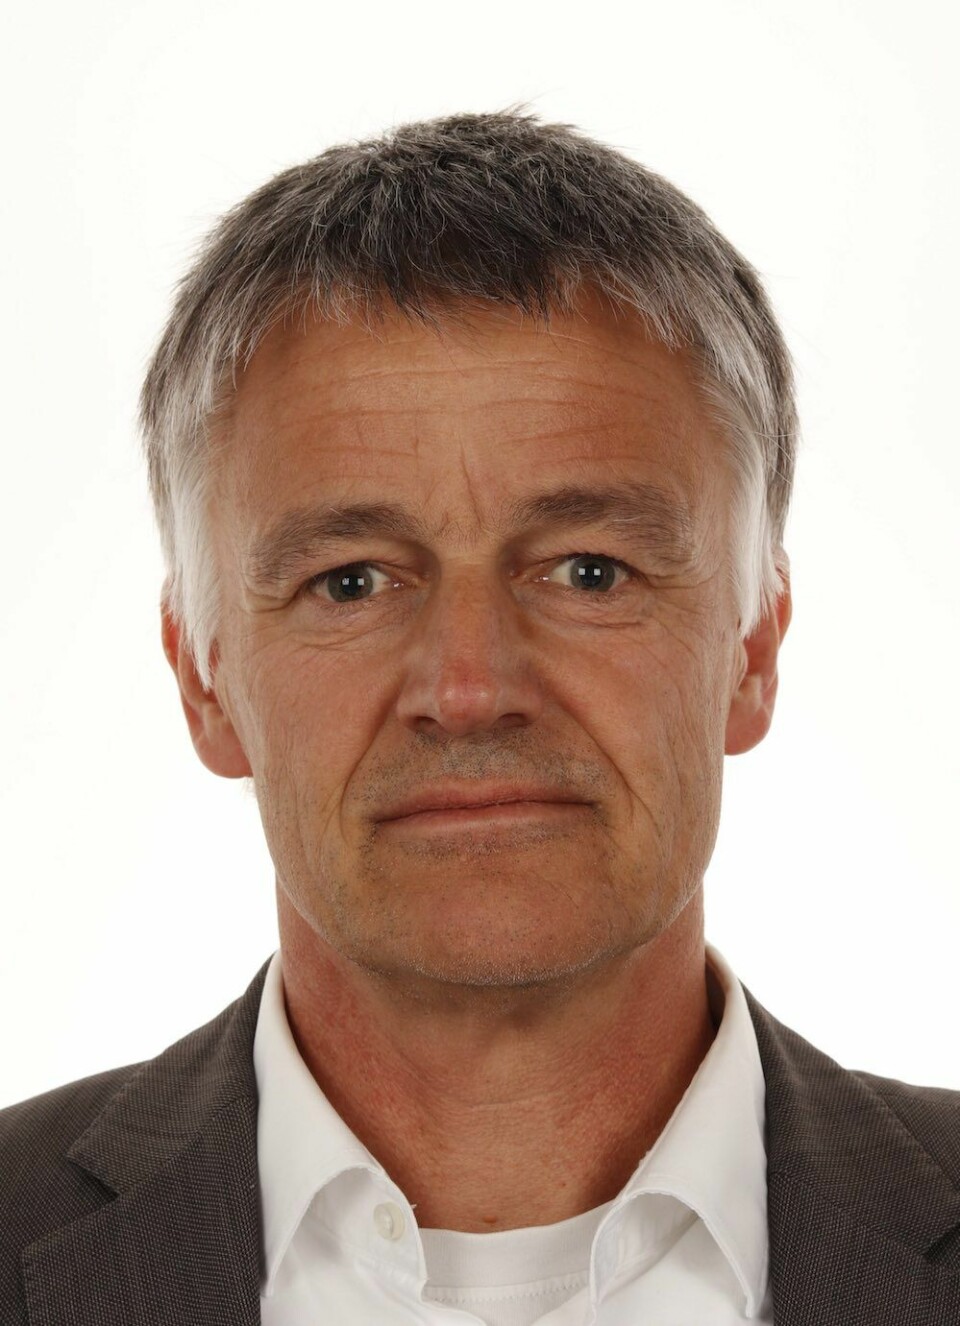 NTNU Professor Christoph Busch is also a board member and one of the founders of the European Association for Biometrics (EAB).